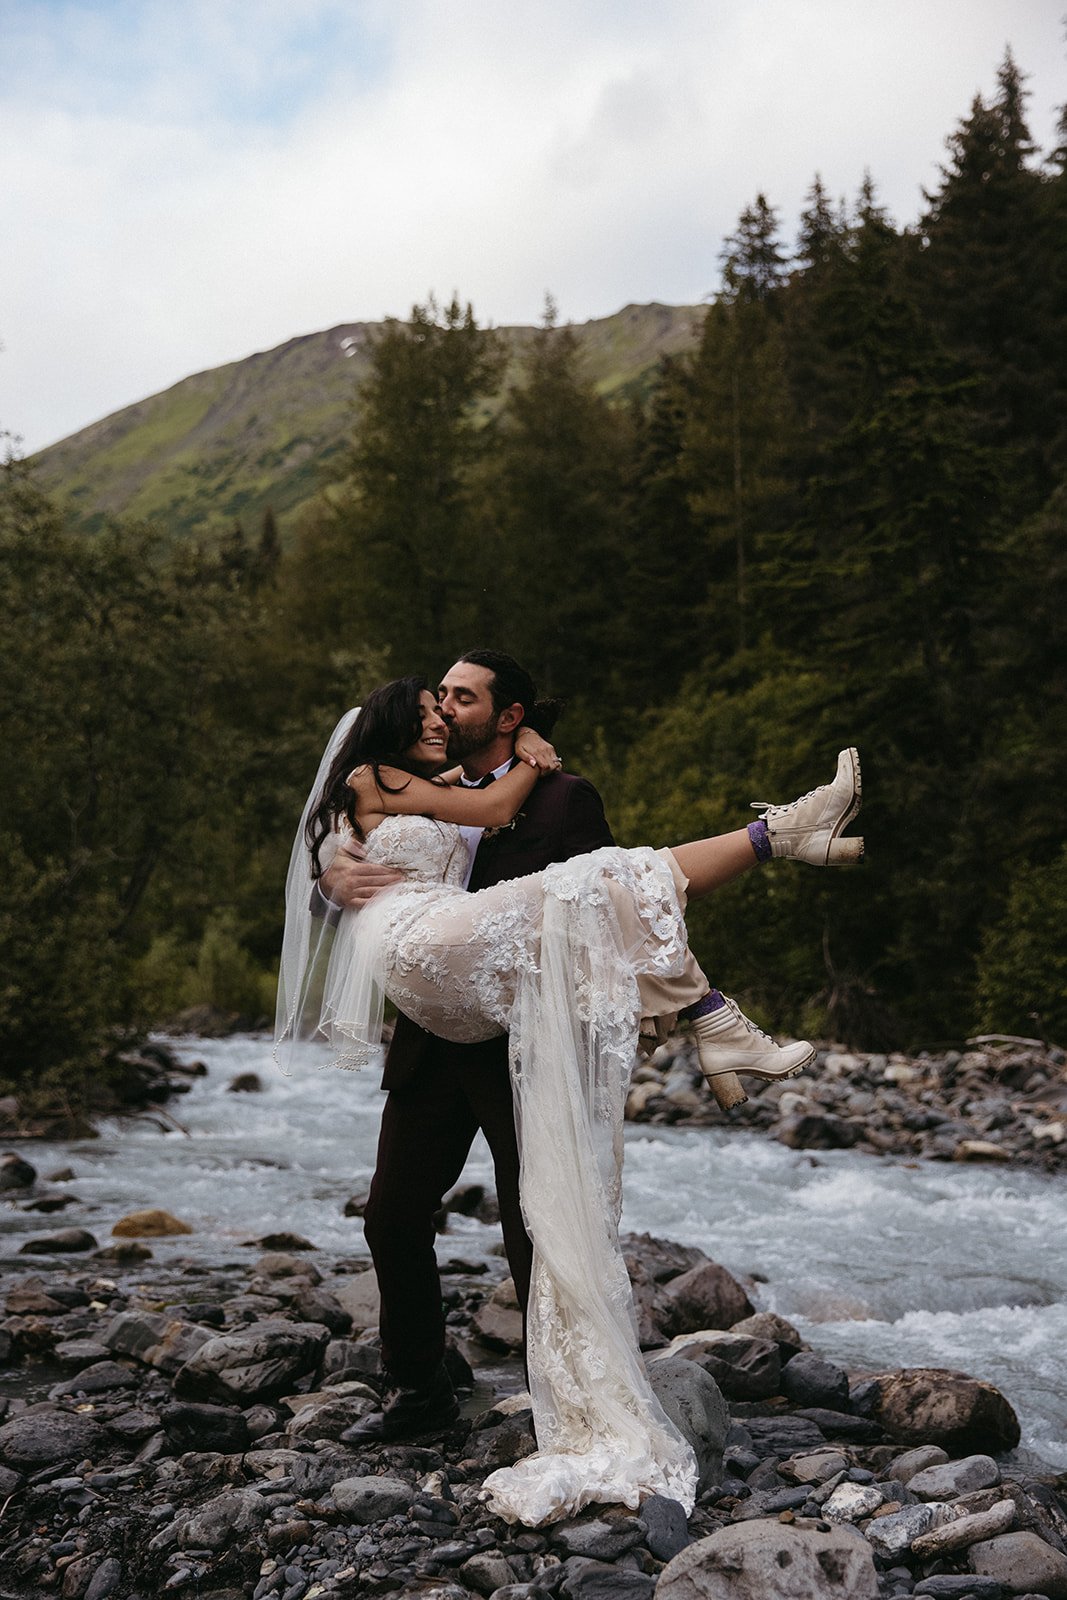 How to elope in the mountains